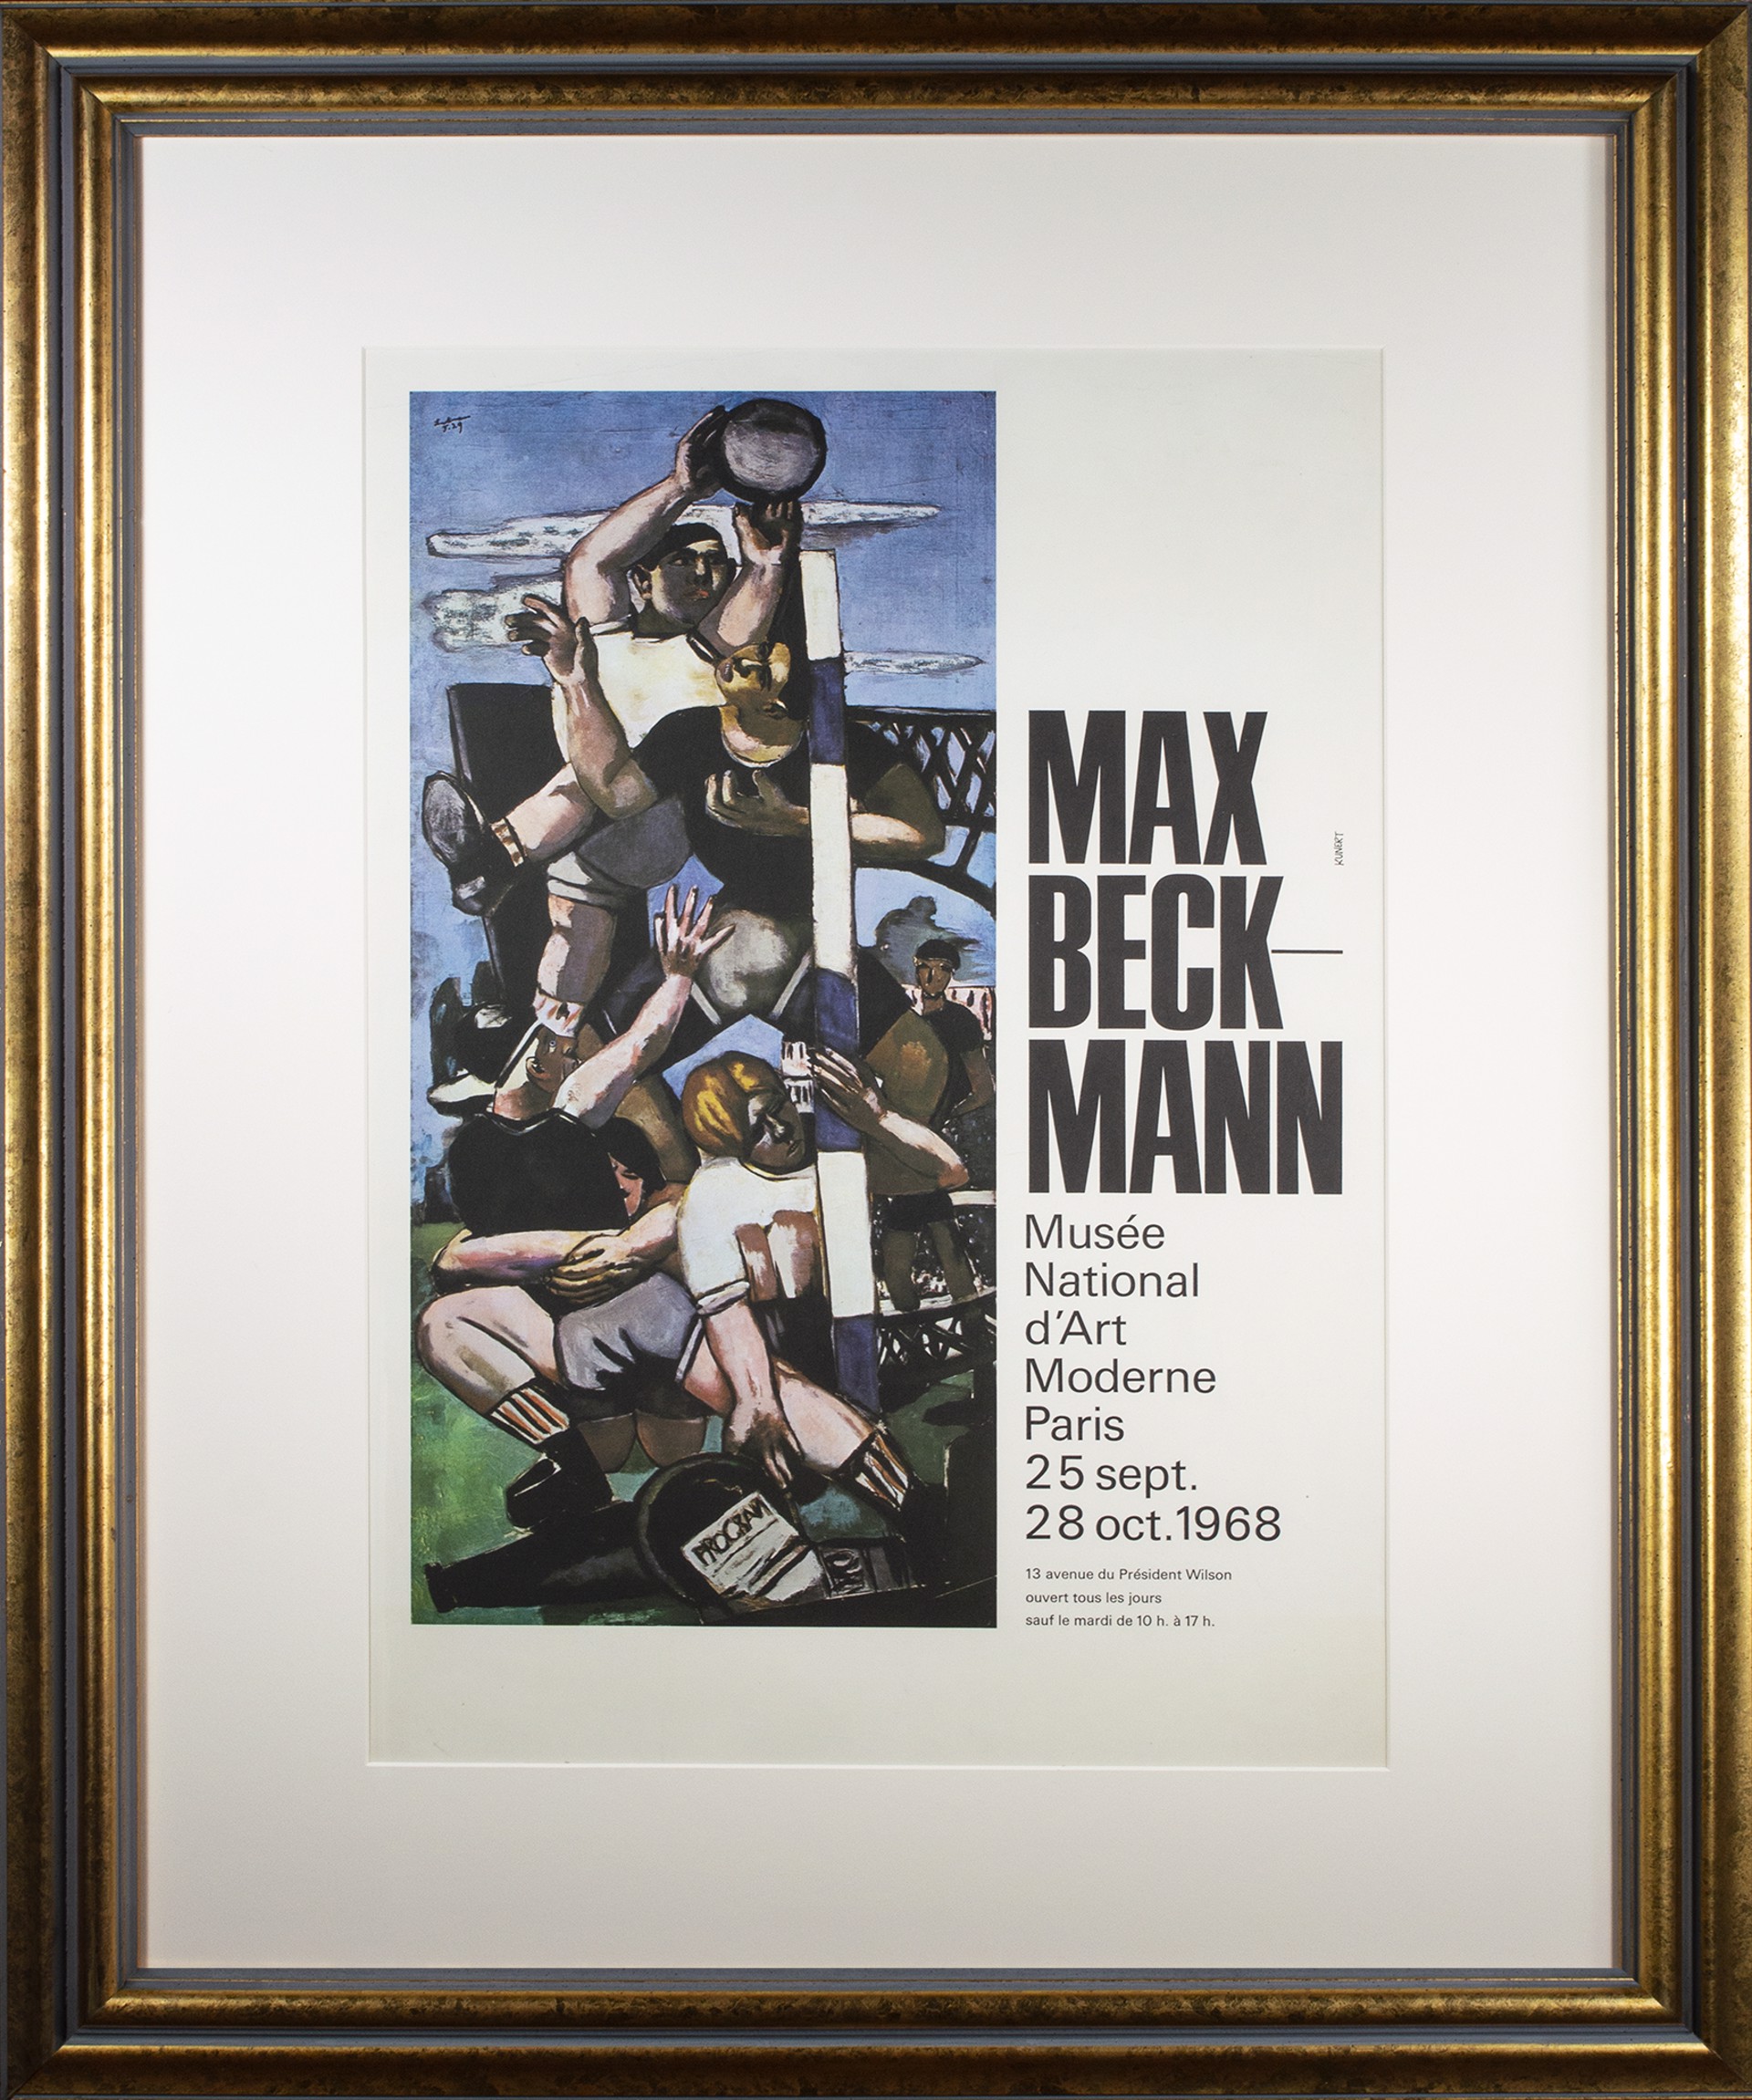 Rugby Players (Rugbyspieler) – Musée National d'Art Moderne exhibition poster by Max Beckmann